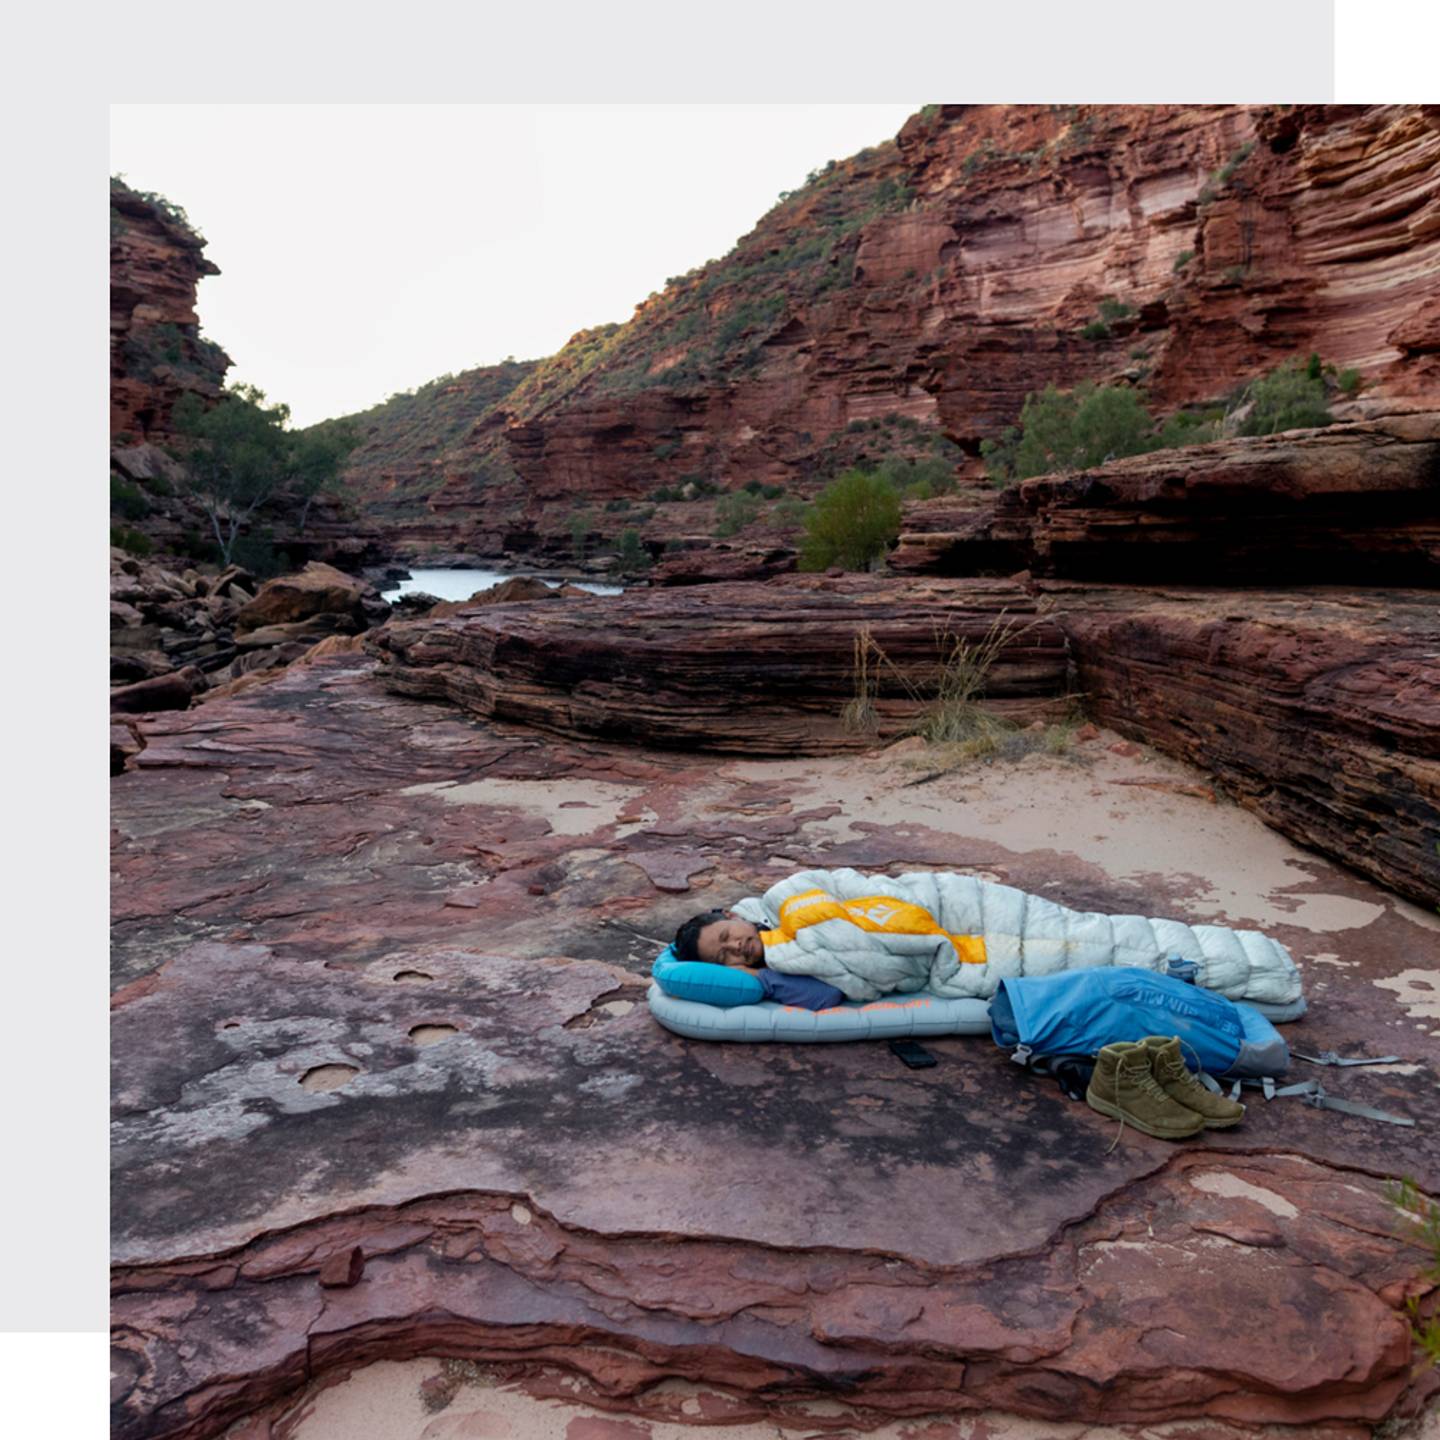 A man sleeping in his sleeping bag on a mat on a rocky ground in an australian canyon at the end of a exhausting day